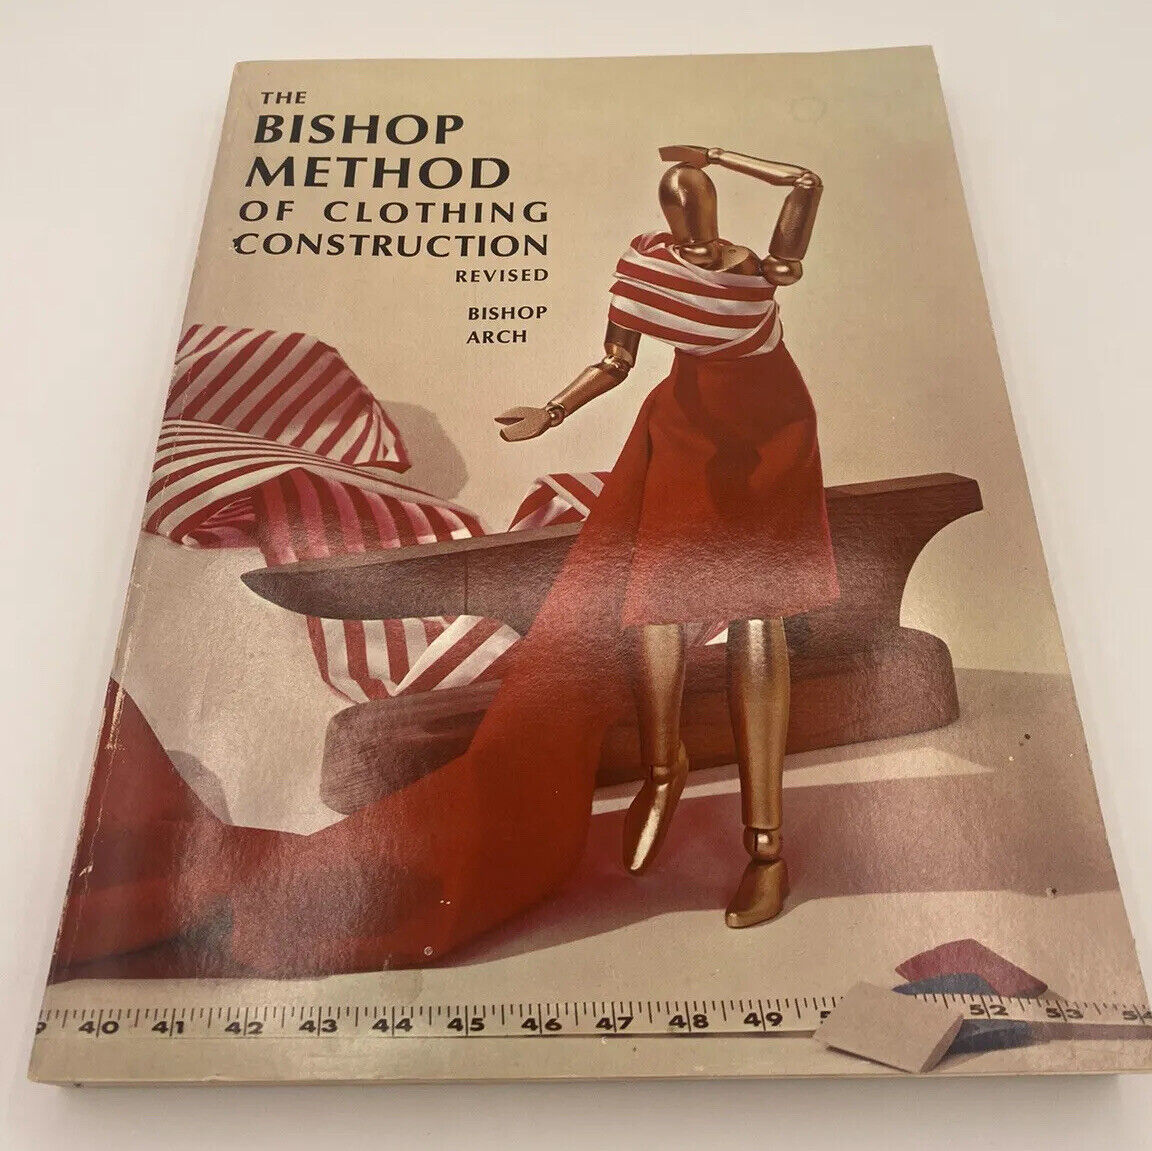 The Bishop Method of Clothing Construction Revised by Bishop Arch Paperback